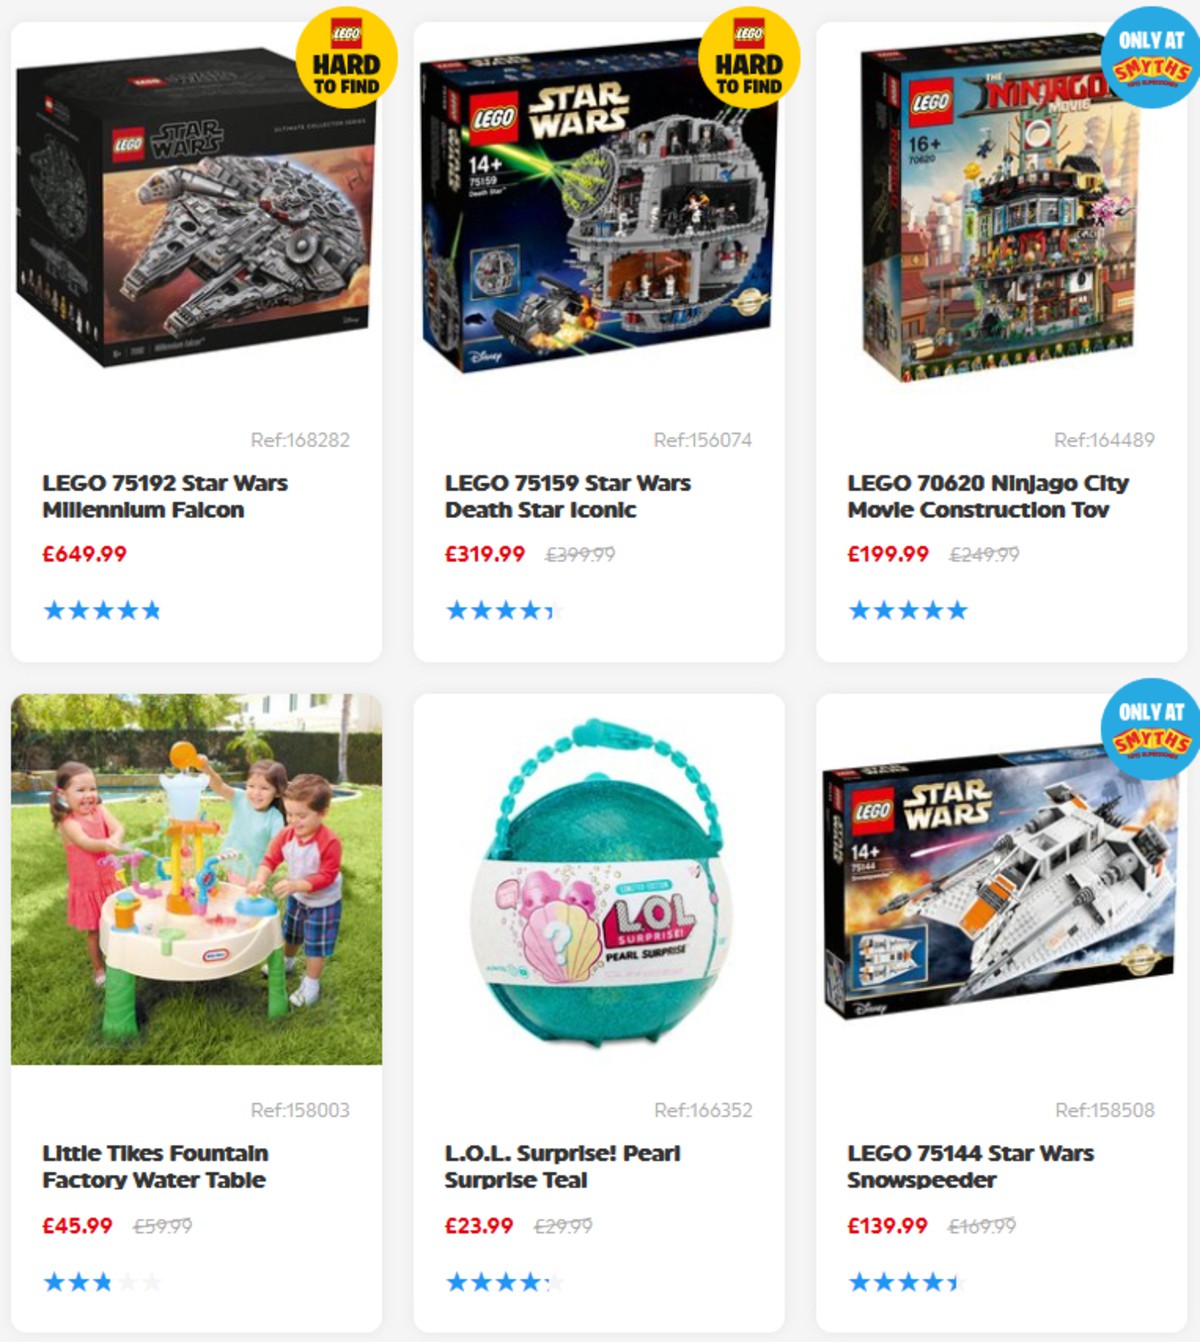 Smyths Toys Offers from 11 May